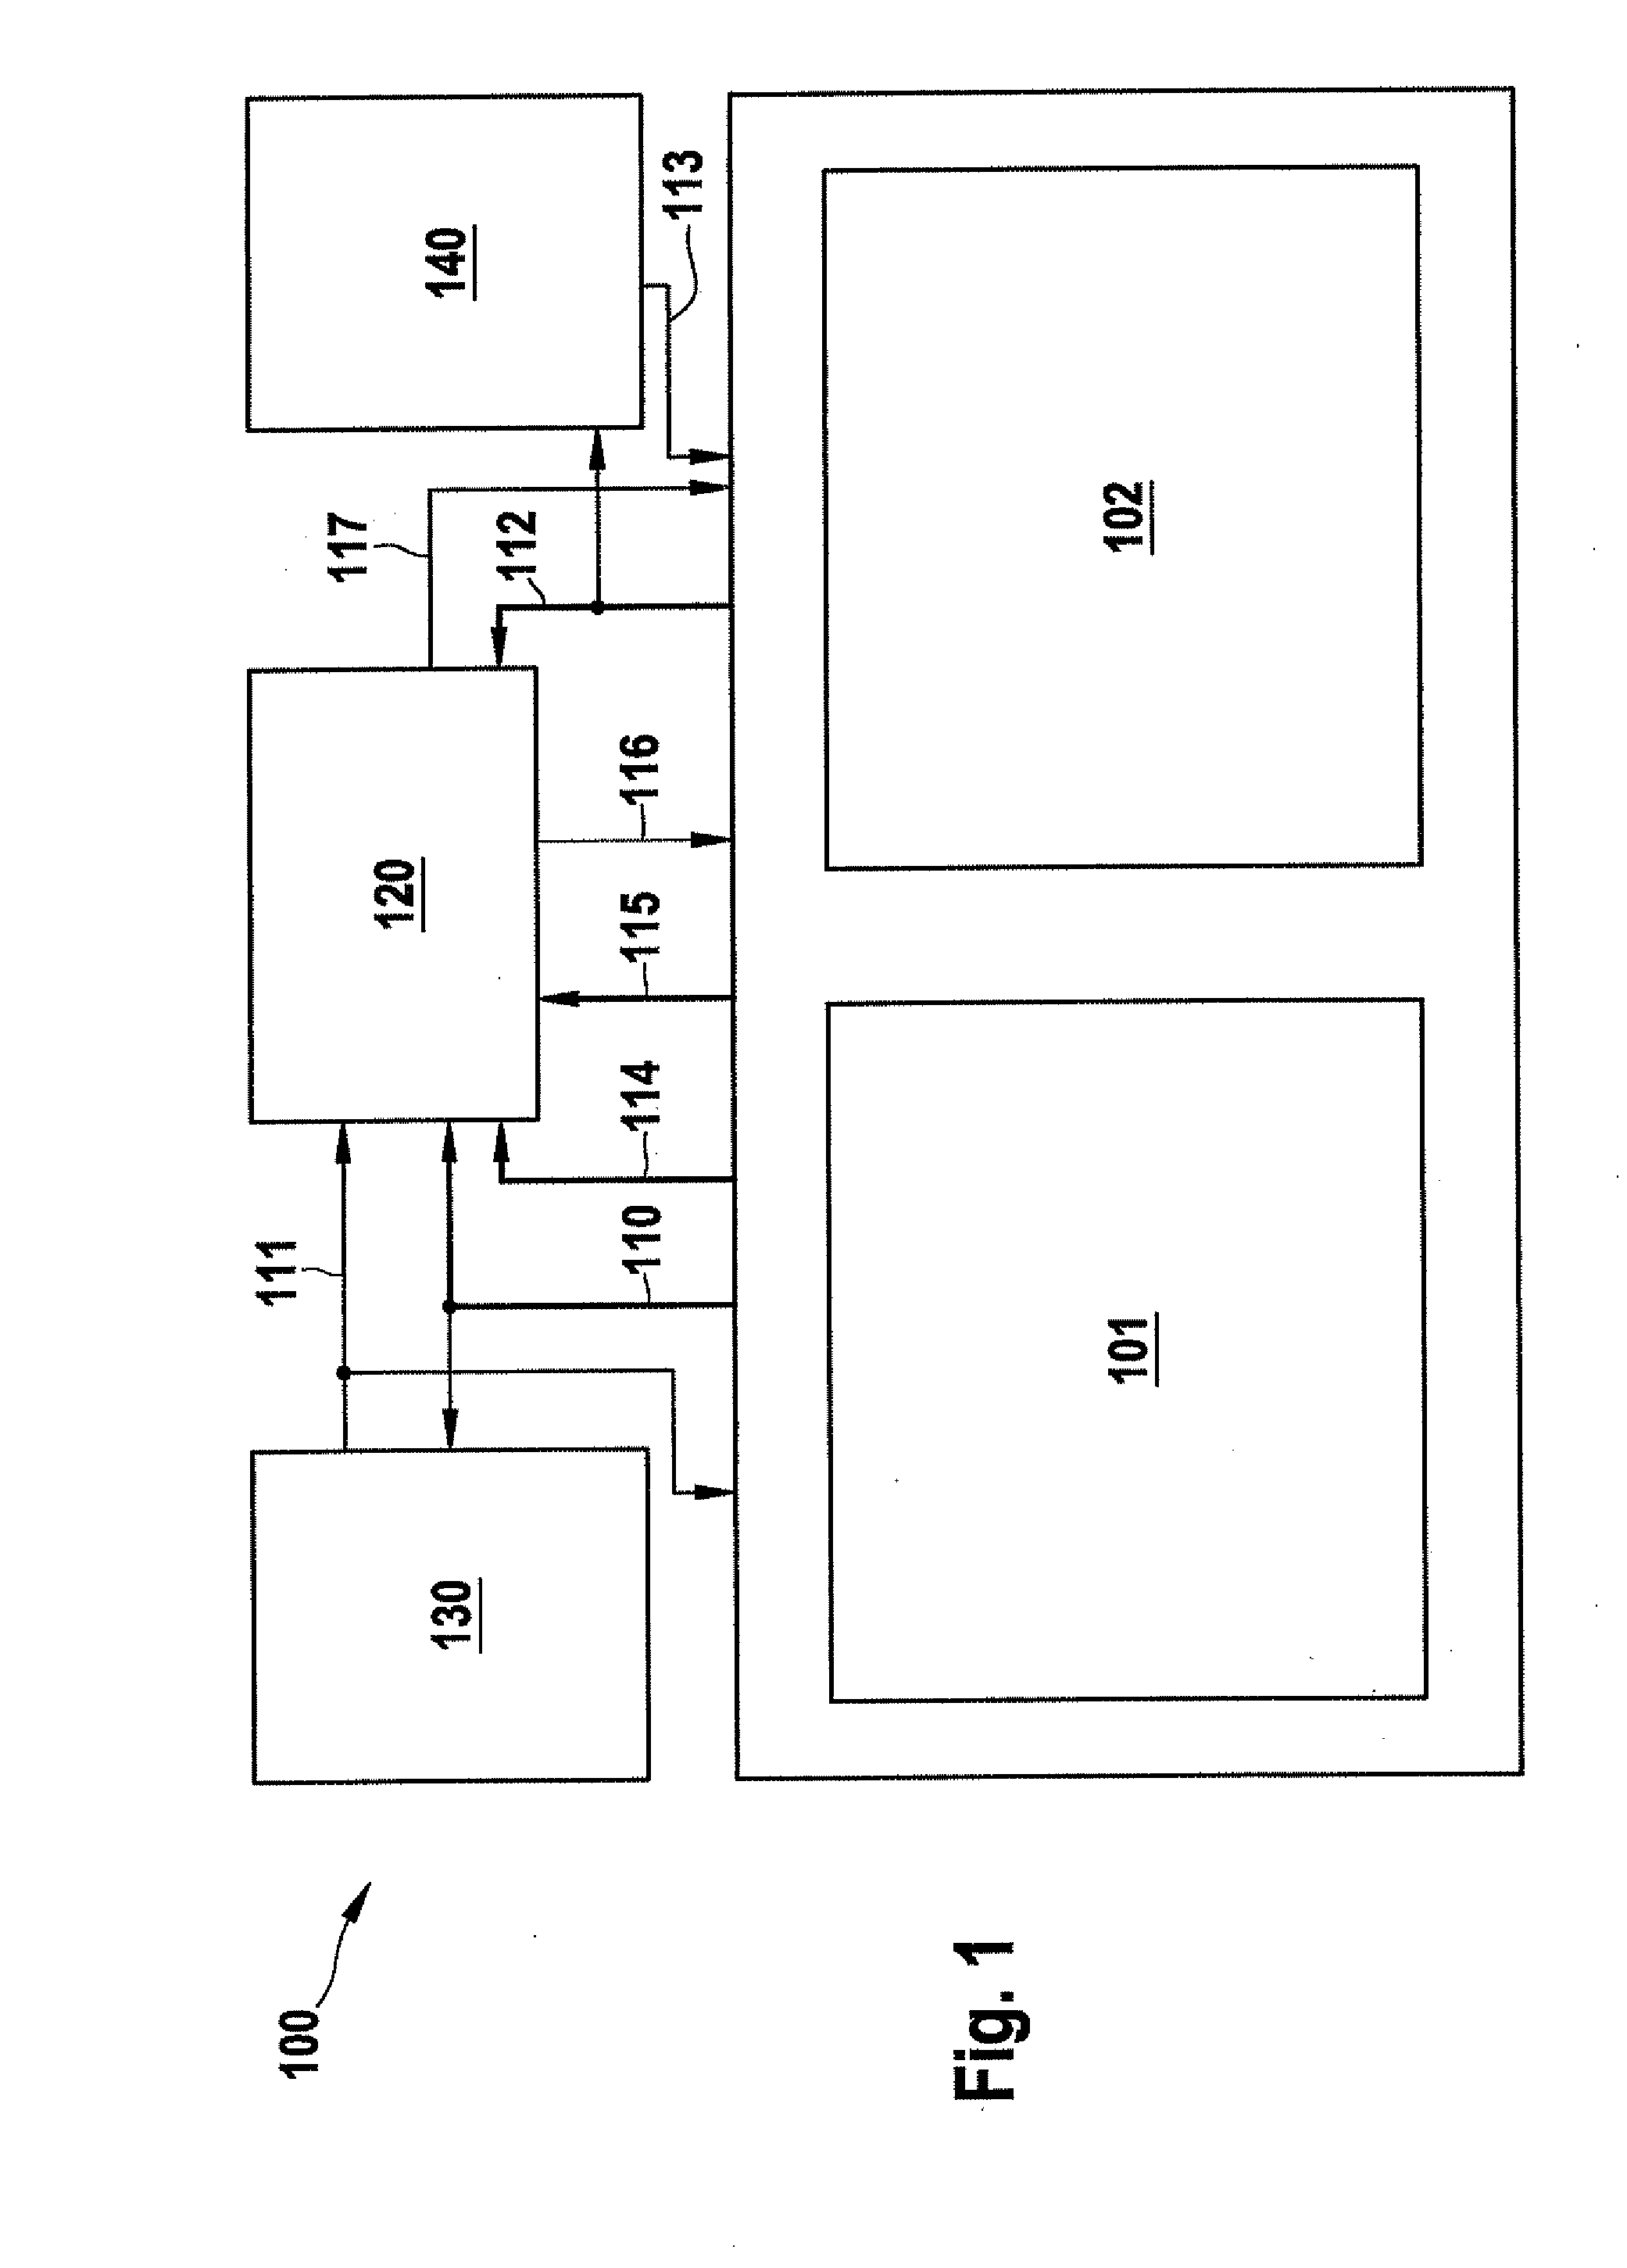 Device and method for correcting errors in a system having at least two execution units having registers